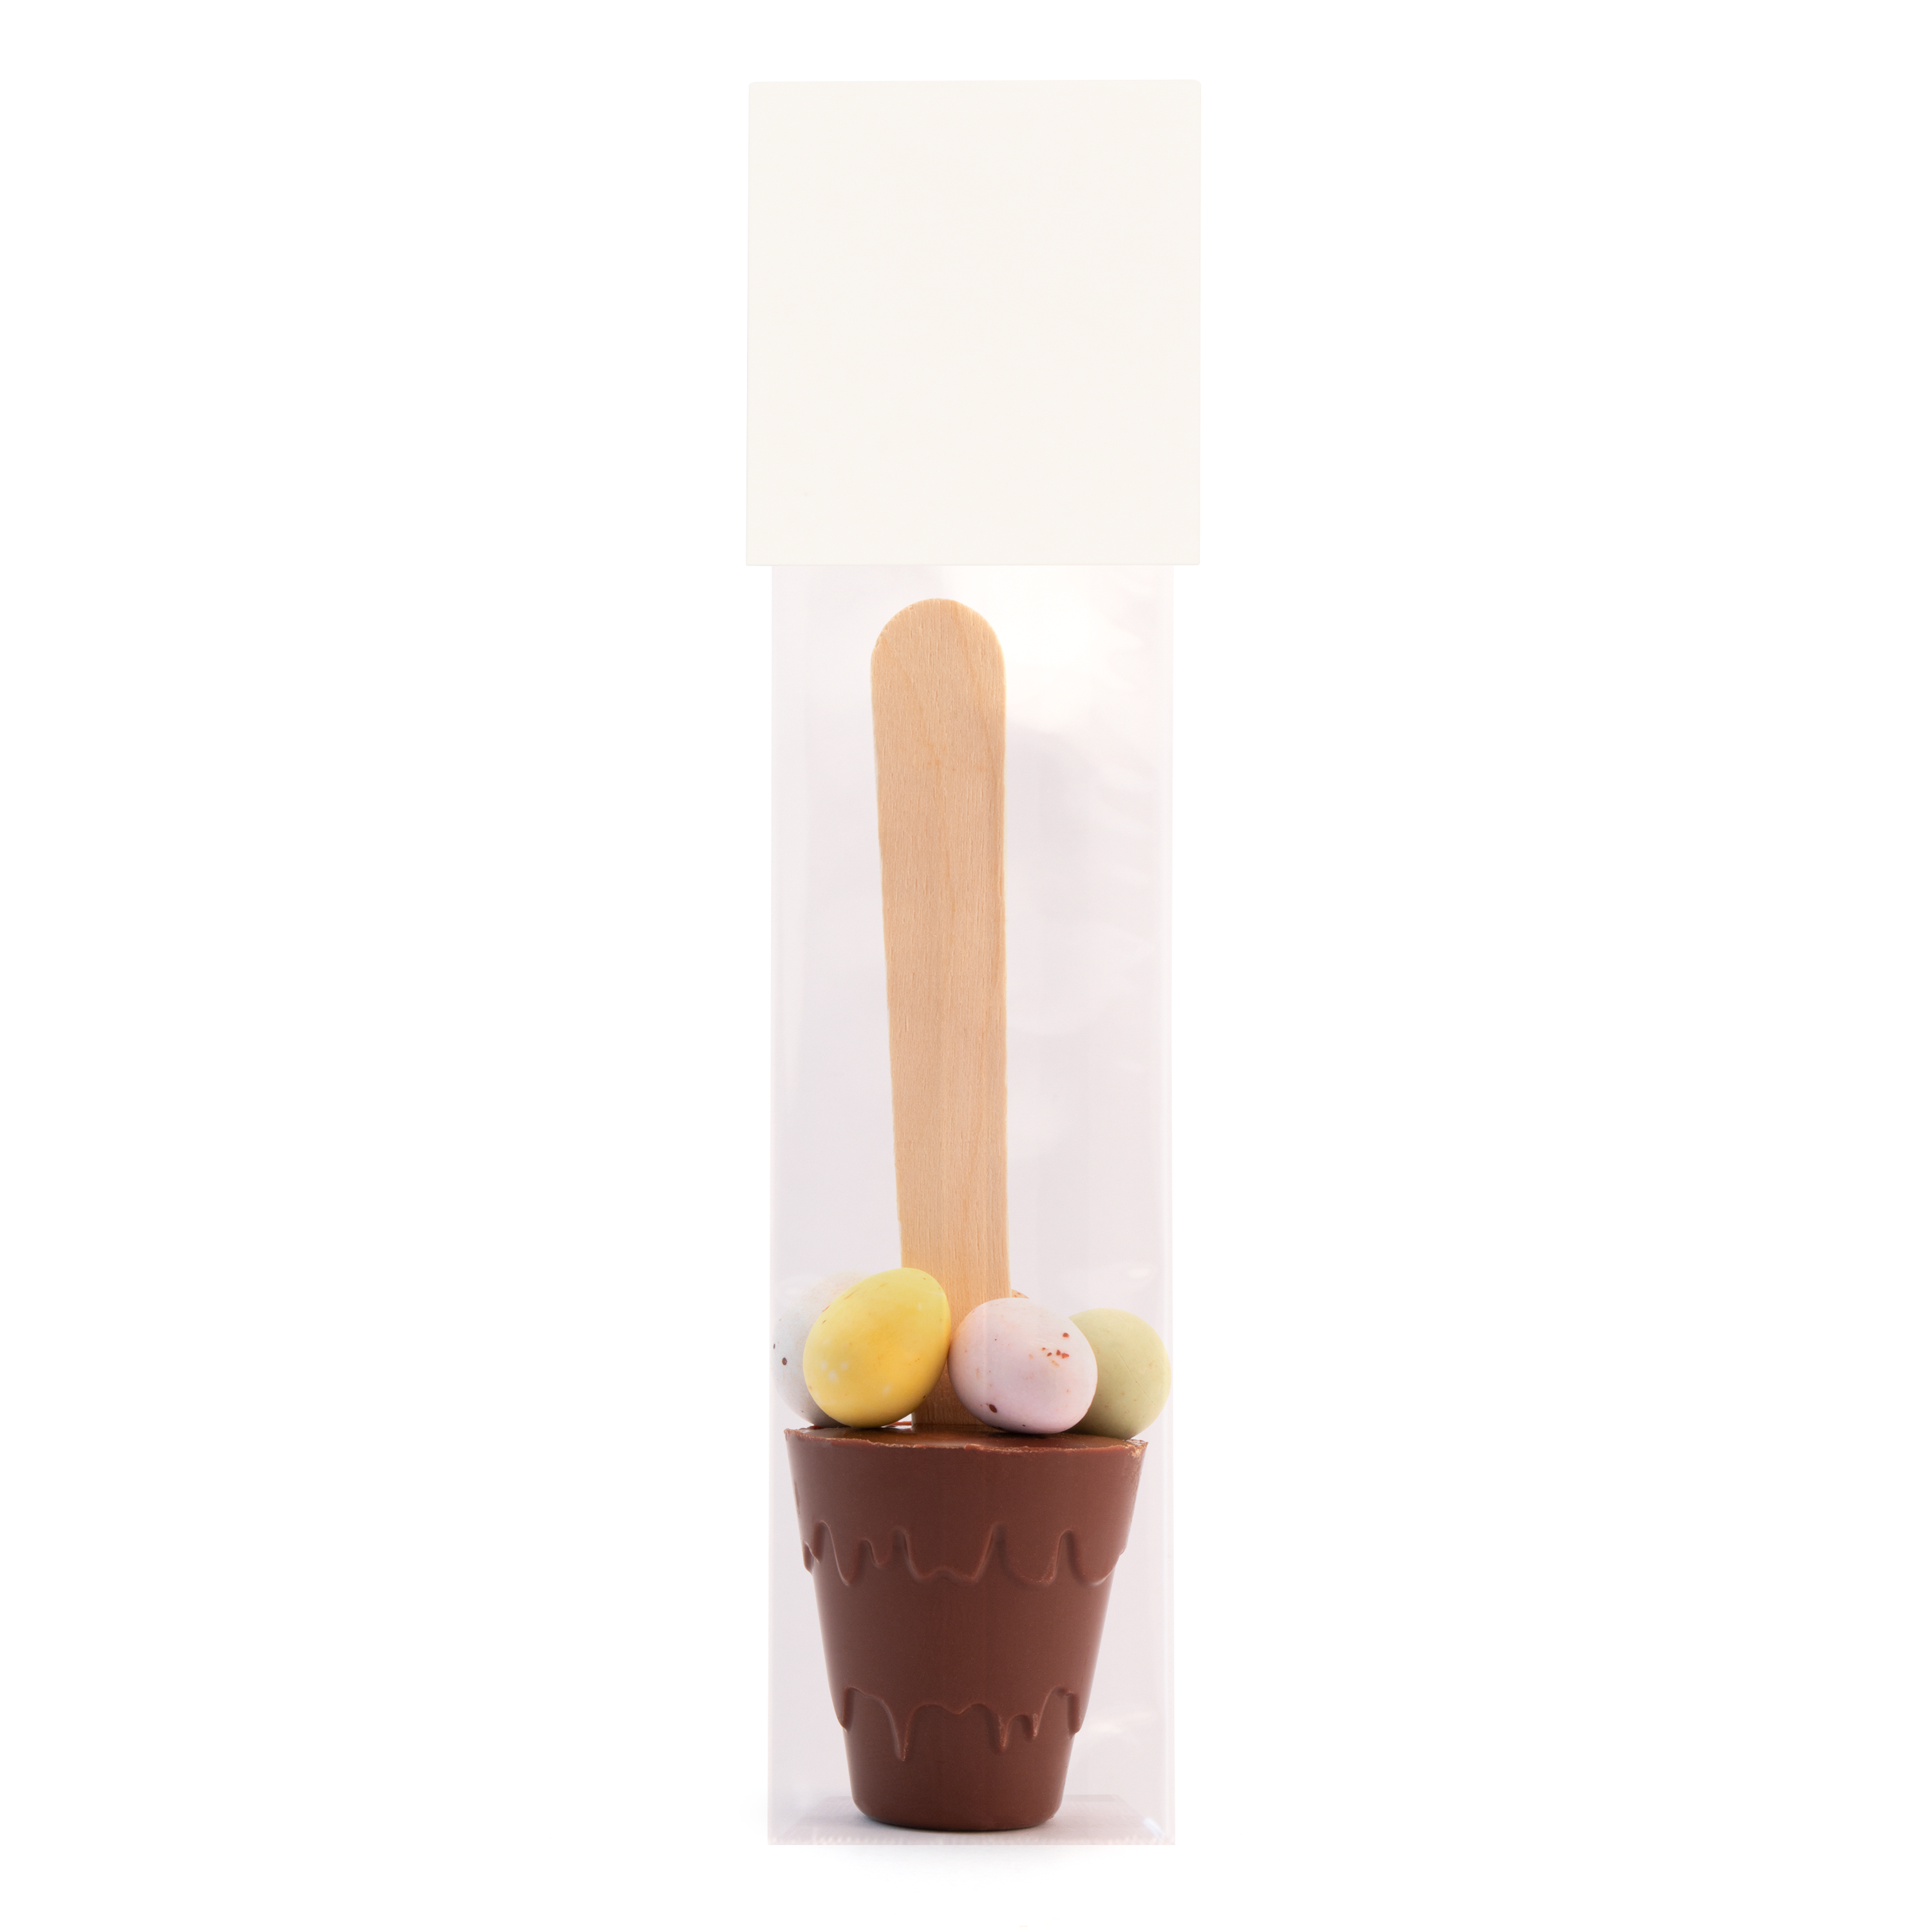 Easter – Info Card - Hot Choc Spoon with Speckled Eggs